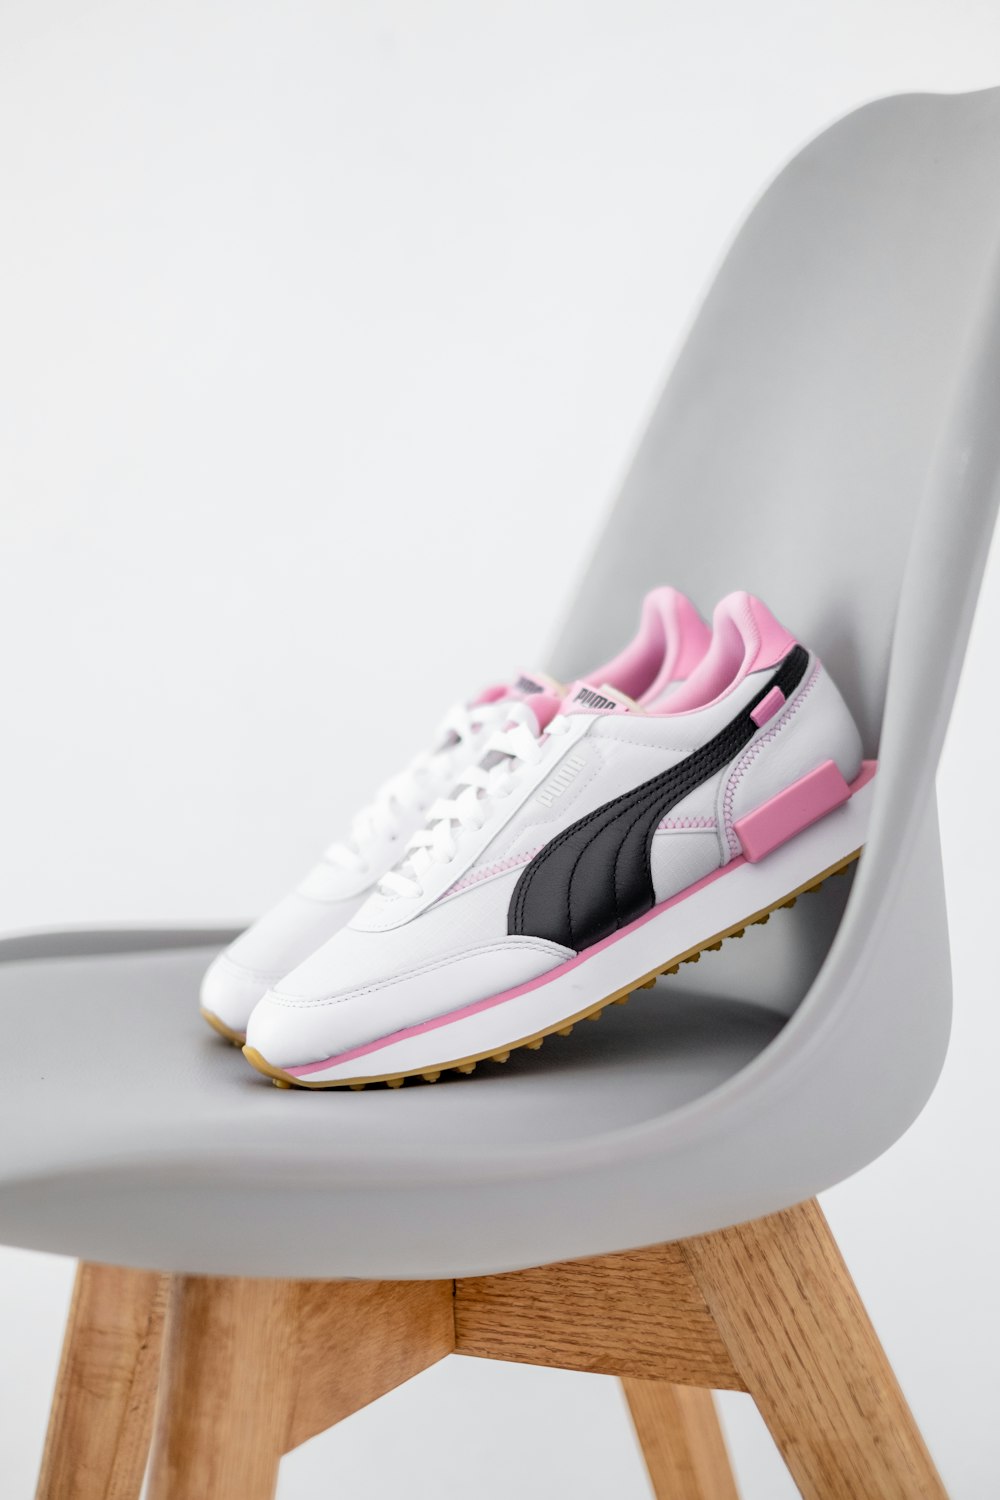 Puma Sneakers Pictures | Download Free Images on Unsplash